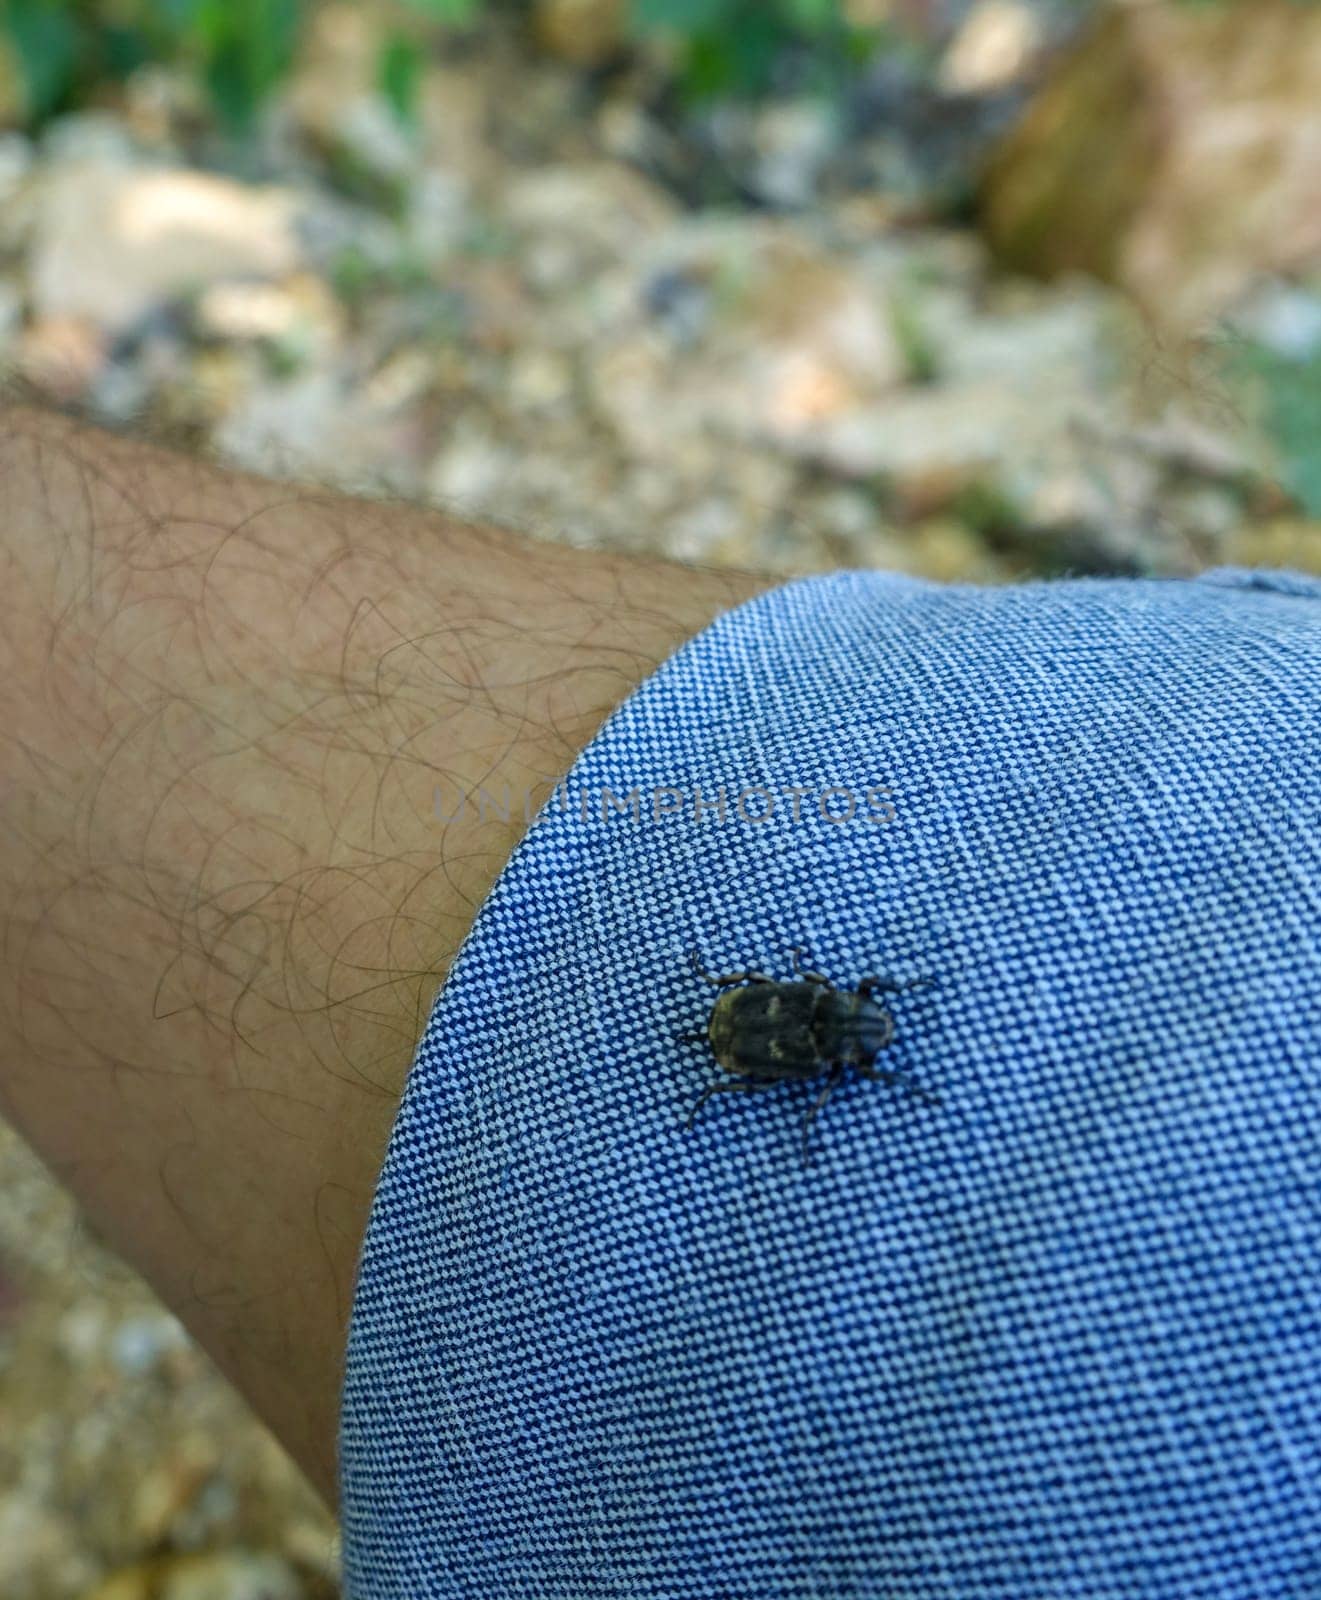 tick standing on a person's clothes,